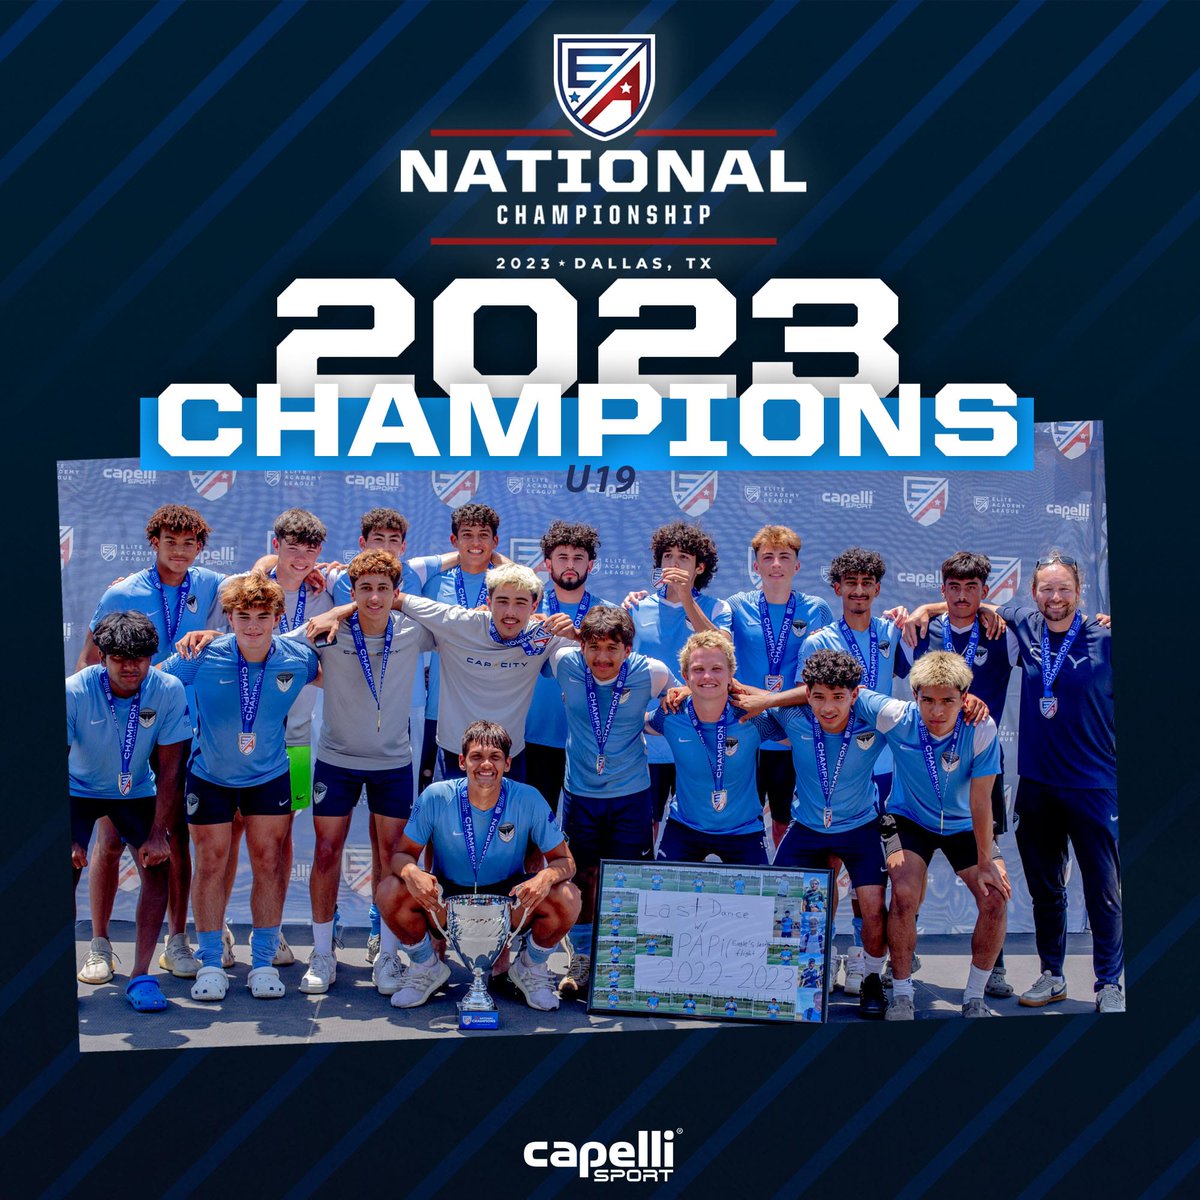 It was my last day in my Youth Soccer career. It was a great one. A great way to end with the National Championship. A National title missing in my career is fulfilled today 🙏🙏. @TreWright17 @CapitalCitySC @EliteAcademyL